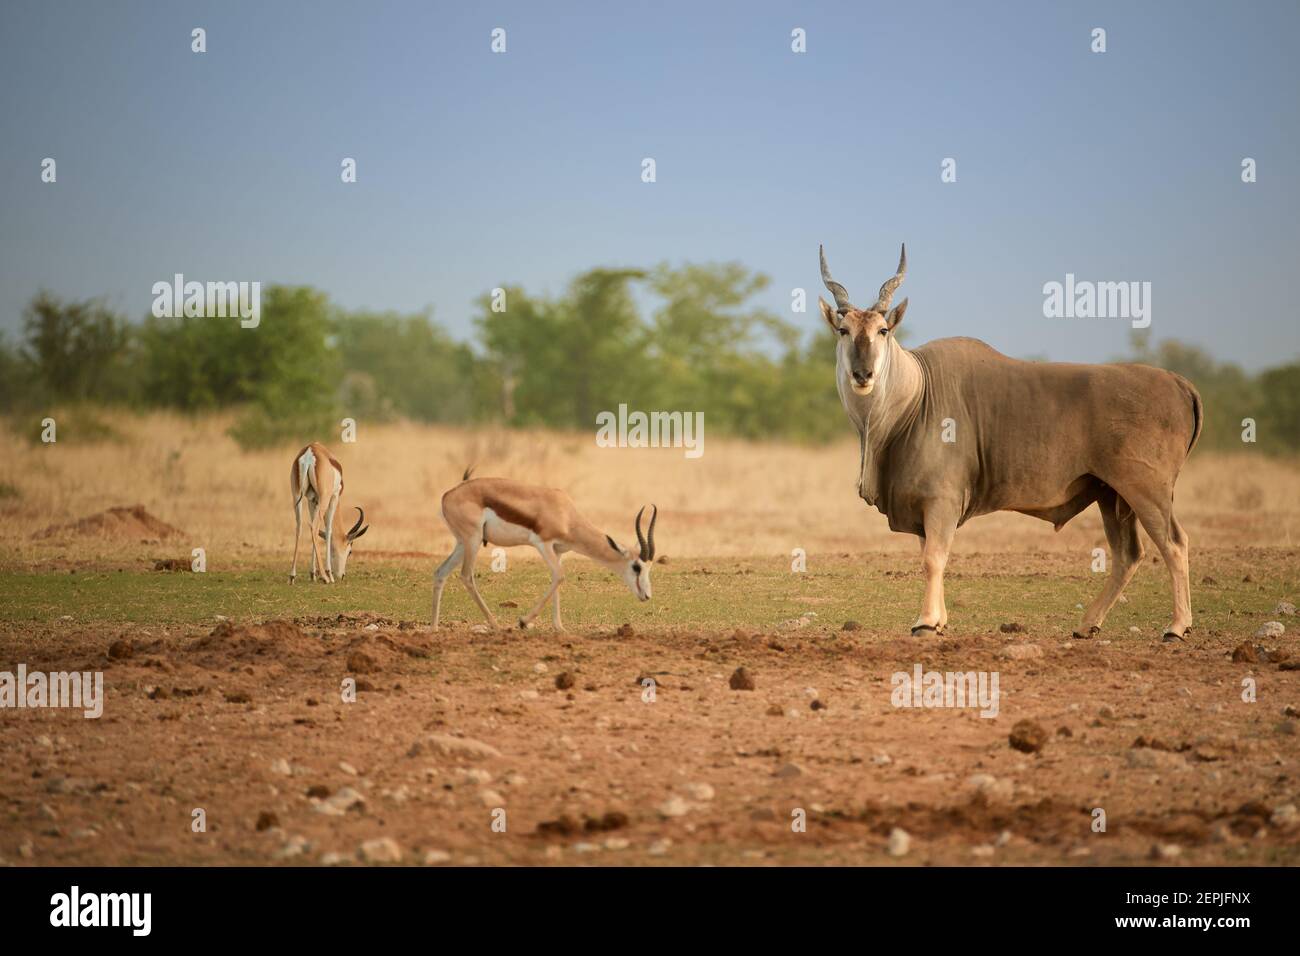 Huge Eland antelope,Taurotragus oryx, male with twisted horns staring at camera in typical arid environment  of Etosha national park. Wildlife photogr Stock Photo